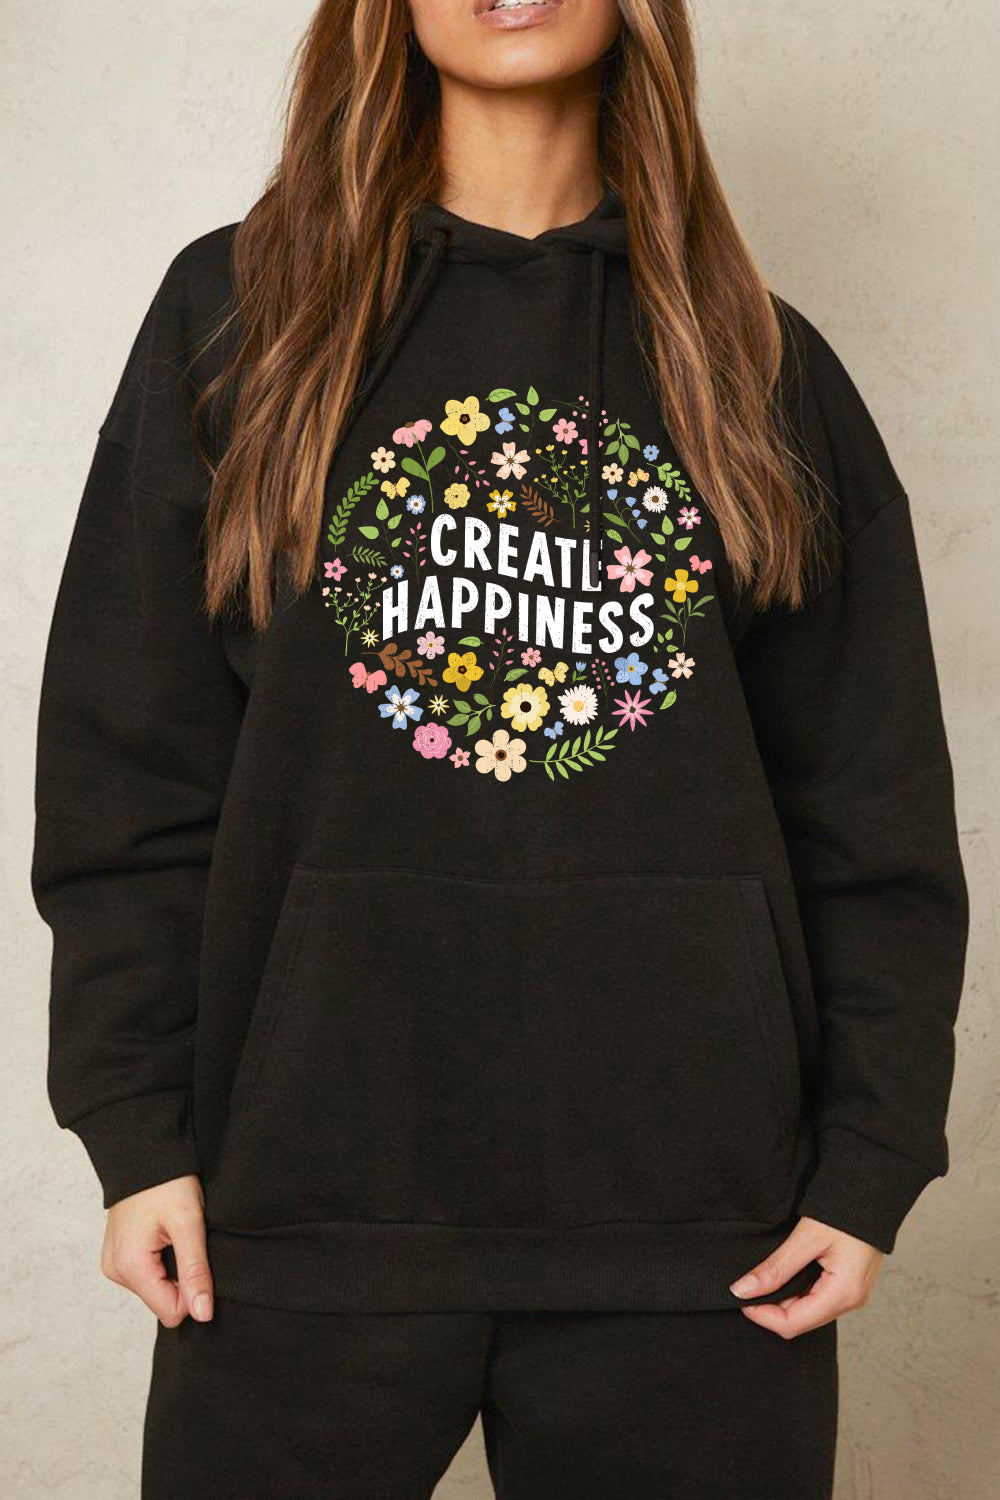 Simply Love Simply Love Full Size CREATE HAPPINESS Graphic Hoodie